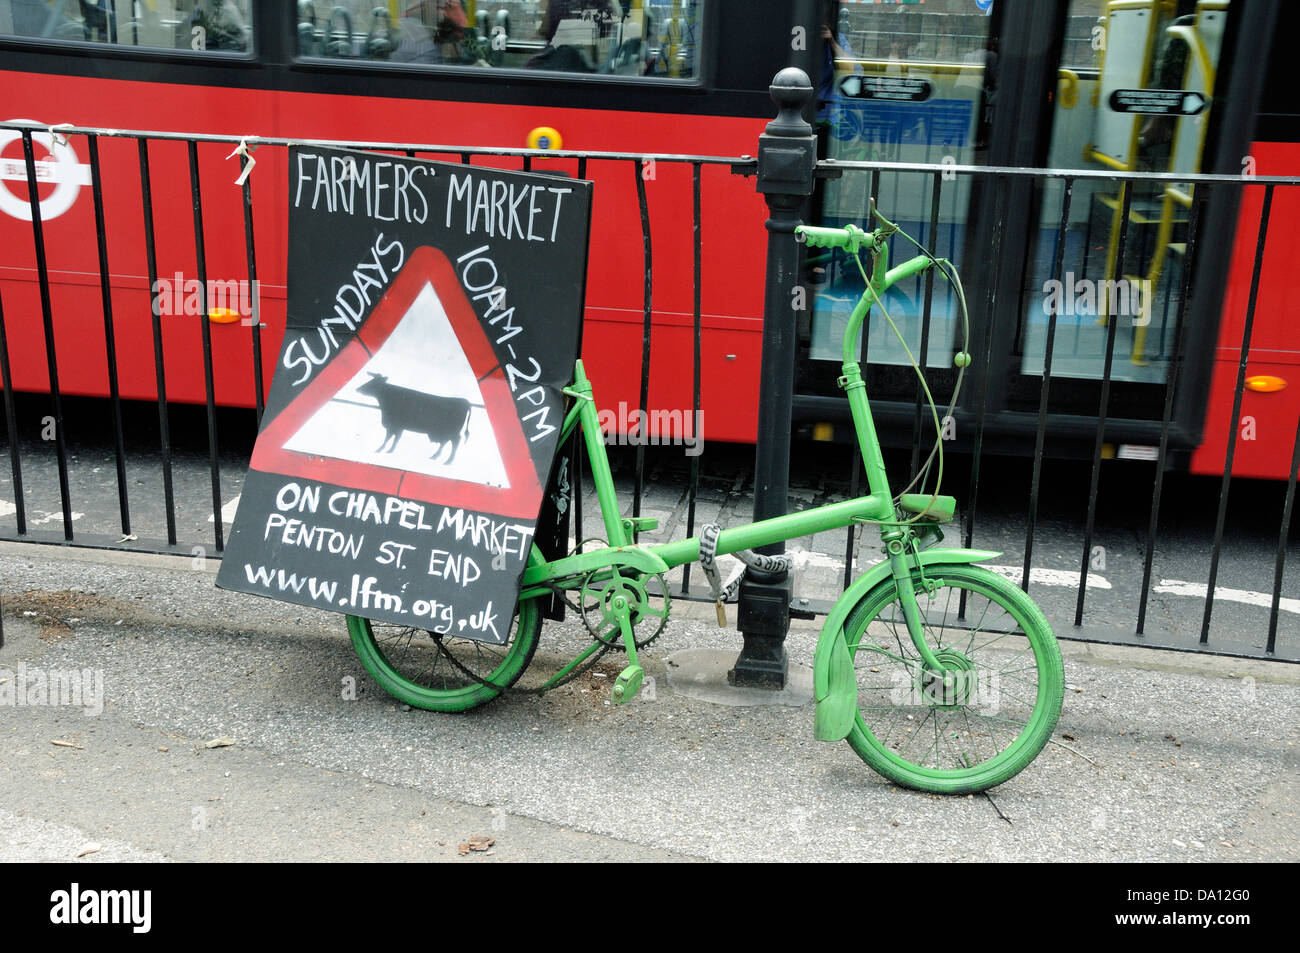 Farmers' Market sign attached to bike with bus passing, London Borough of Islington, England, UK Stock Photo